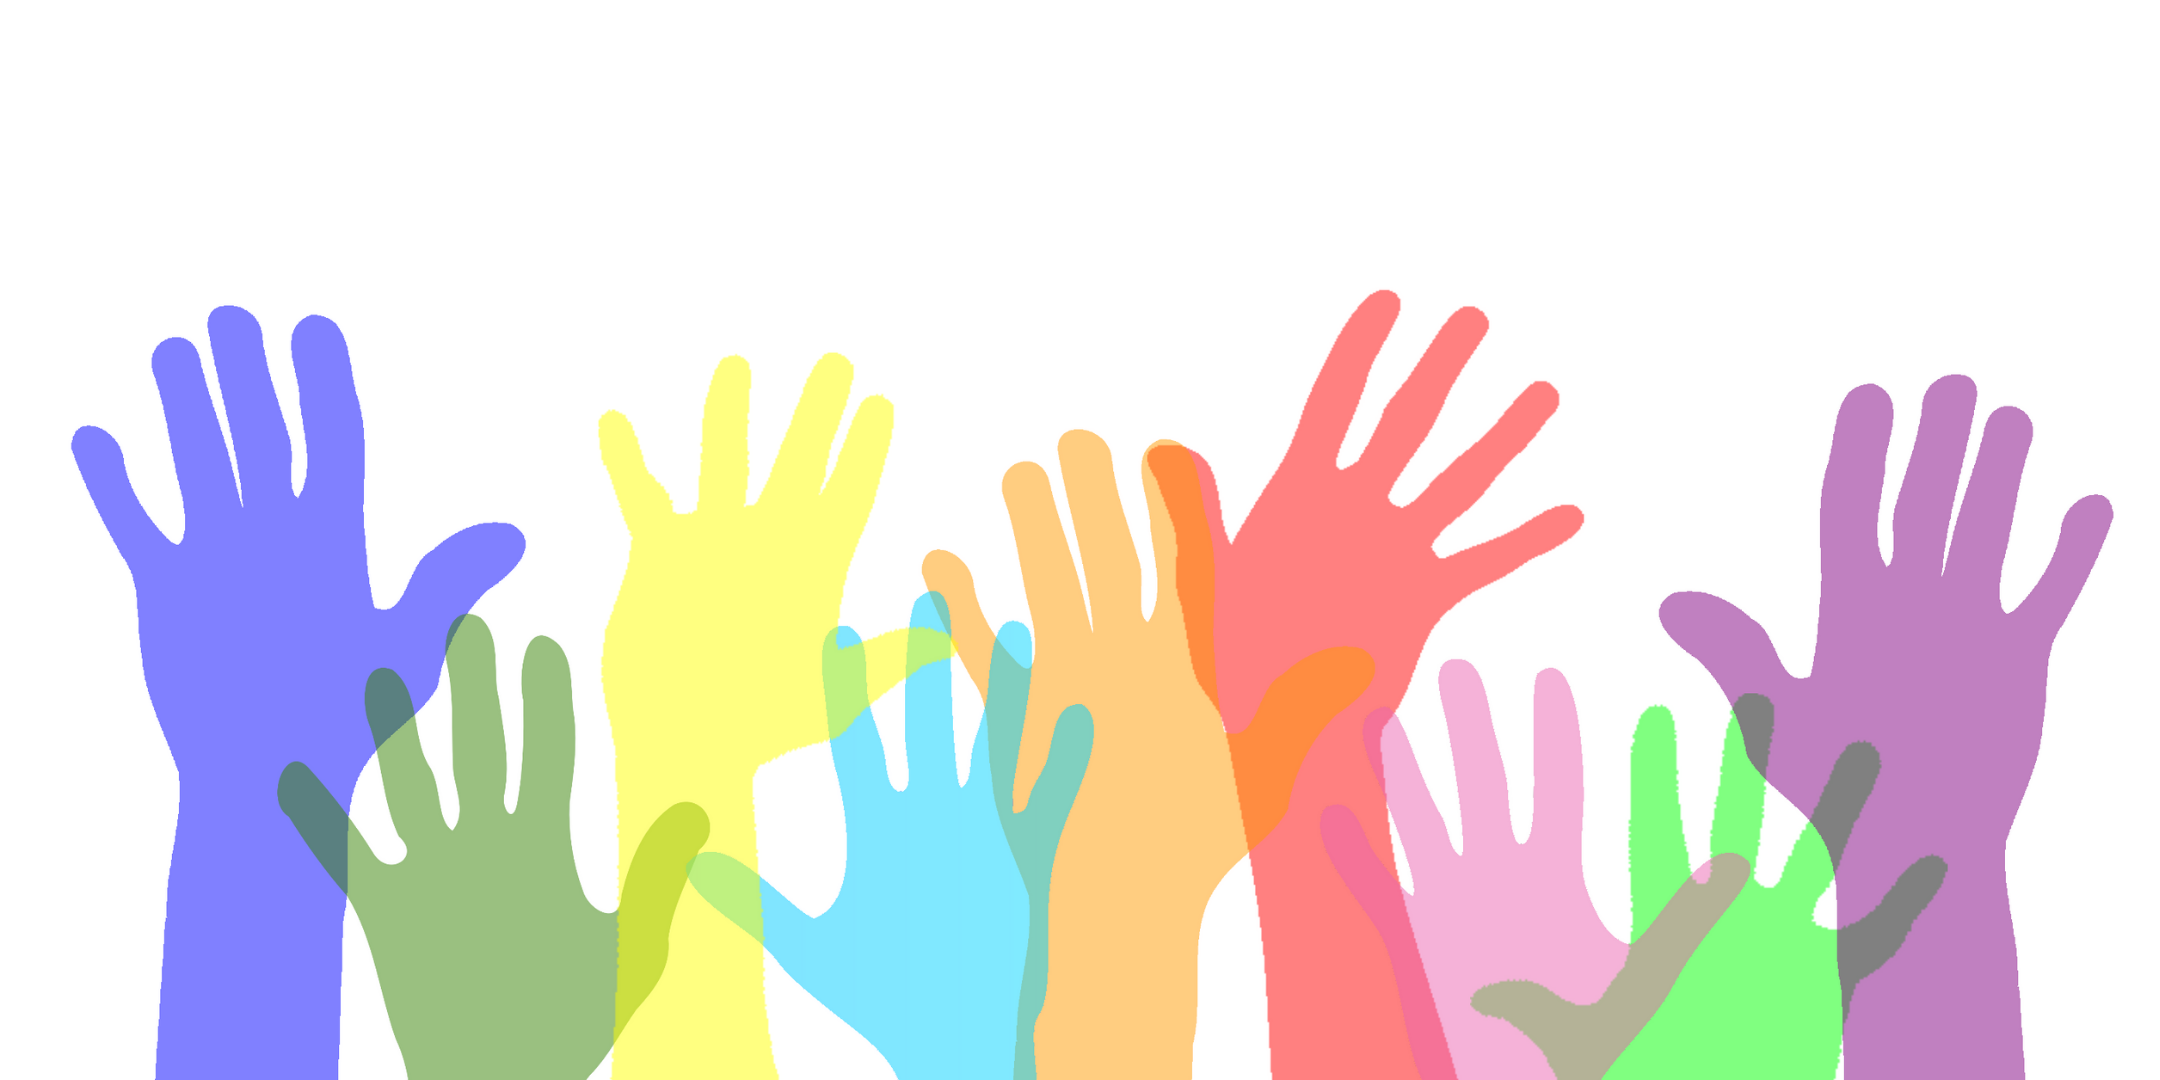 colorful hands raised against a white background